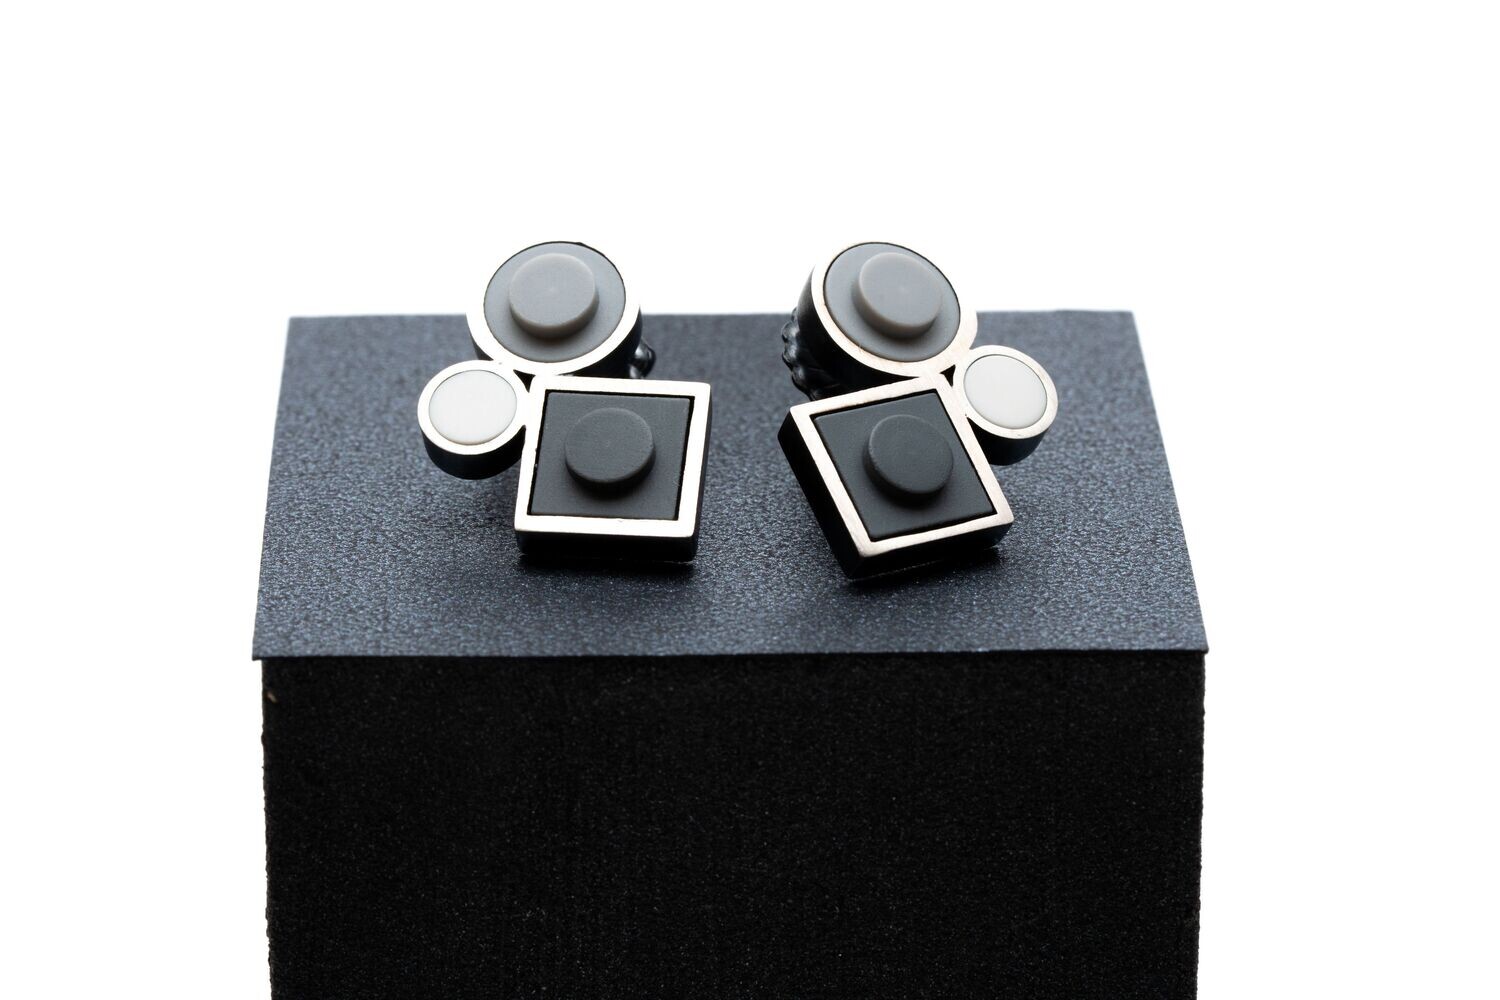 Sanchez, JacQueline- Lego house inspired earrings-earl gray, fog marshmallow sterling silver with patina finish